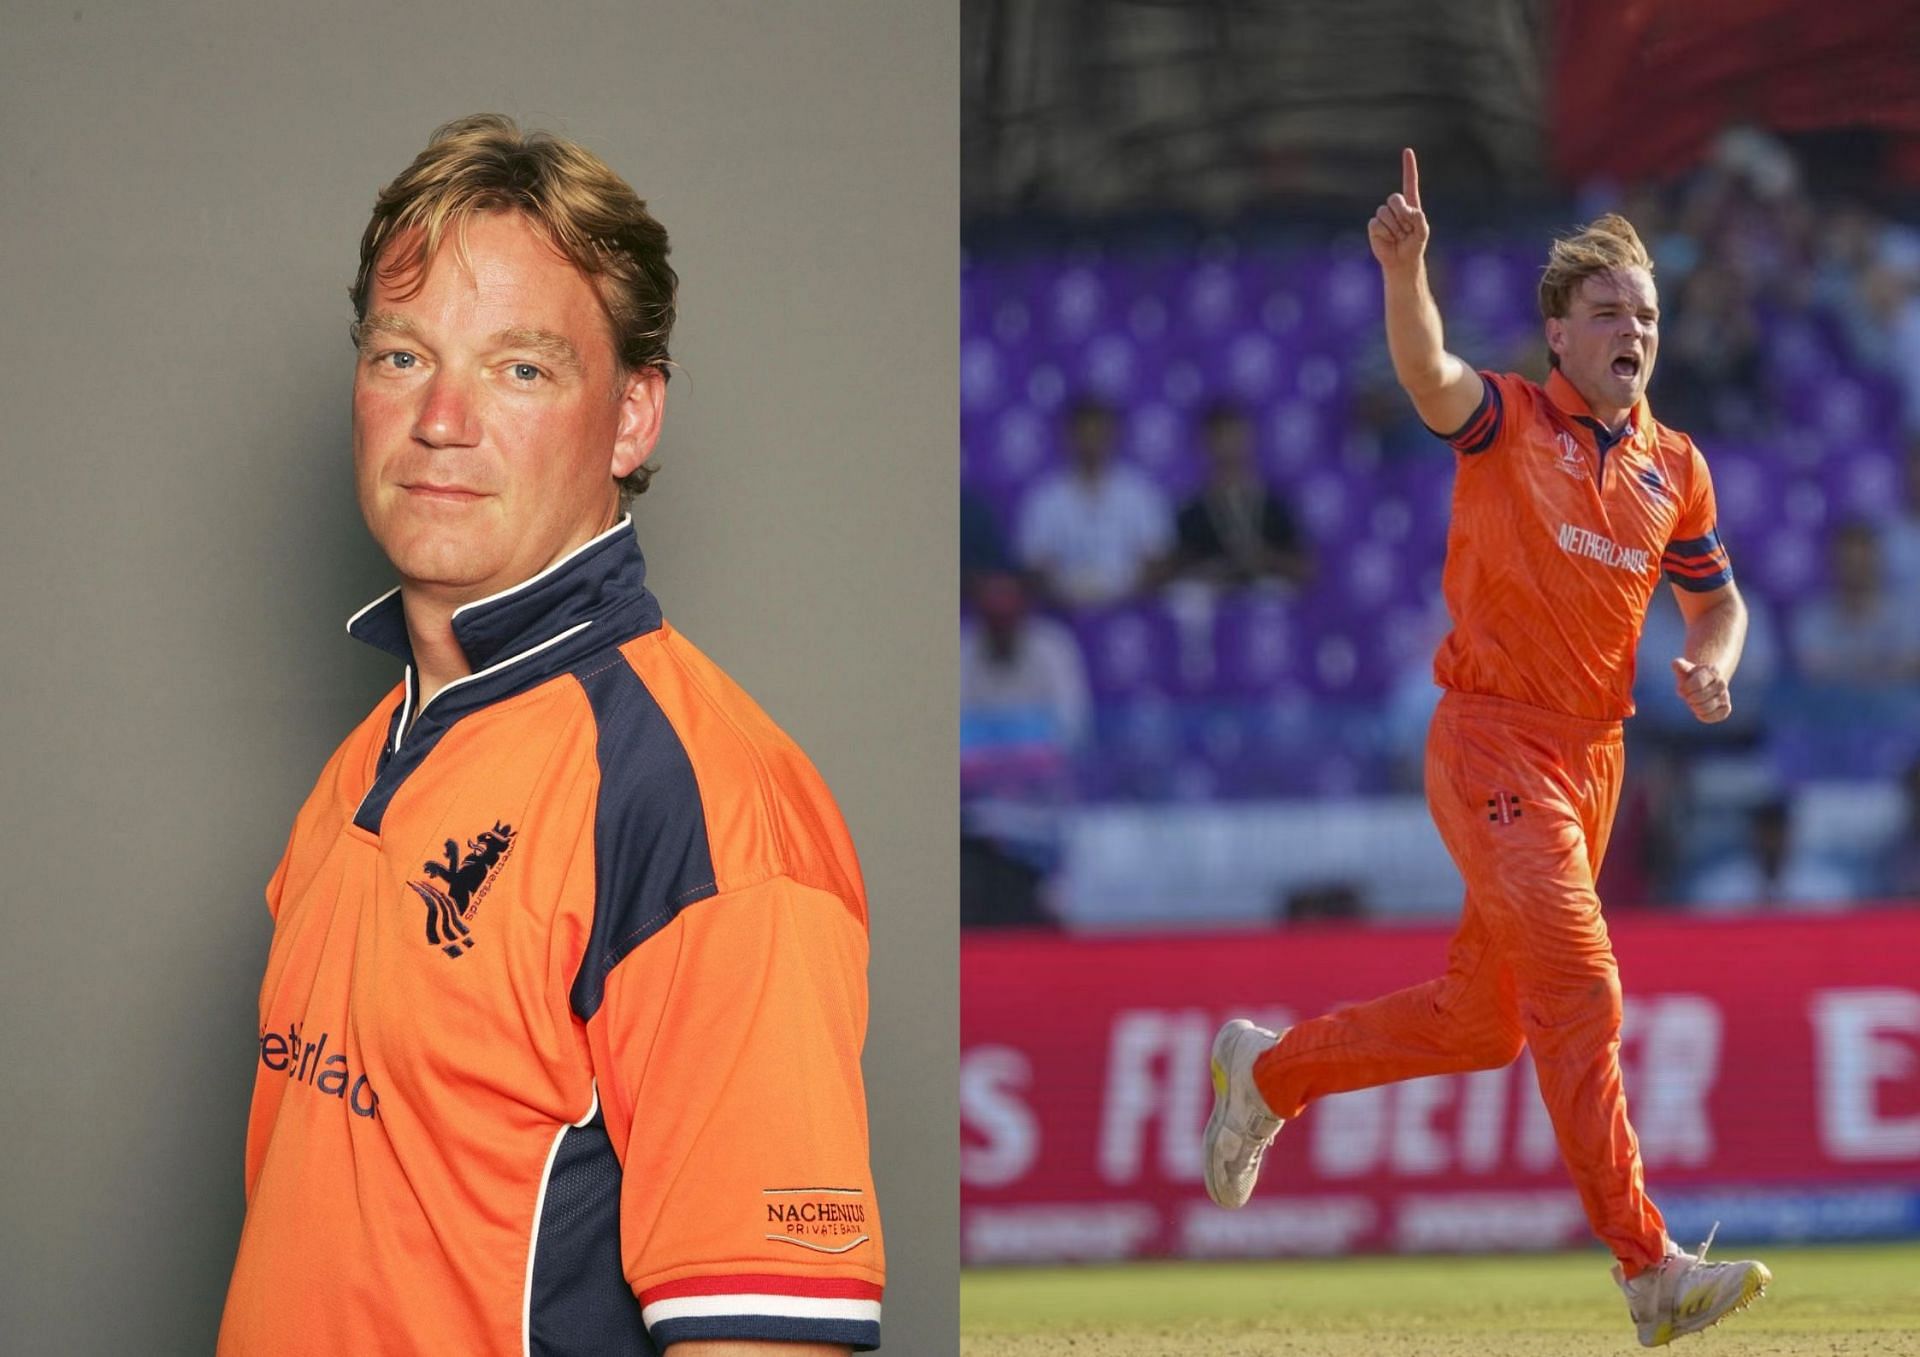 Tim de Leede and his son Bas have now both represented the Dutch at the ODI World Cup (Picture Credits: Getty; AP).